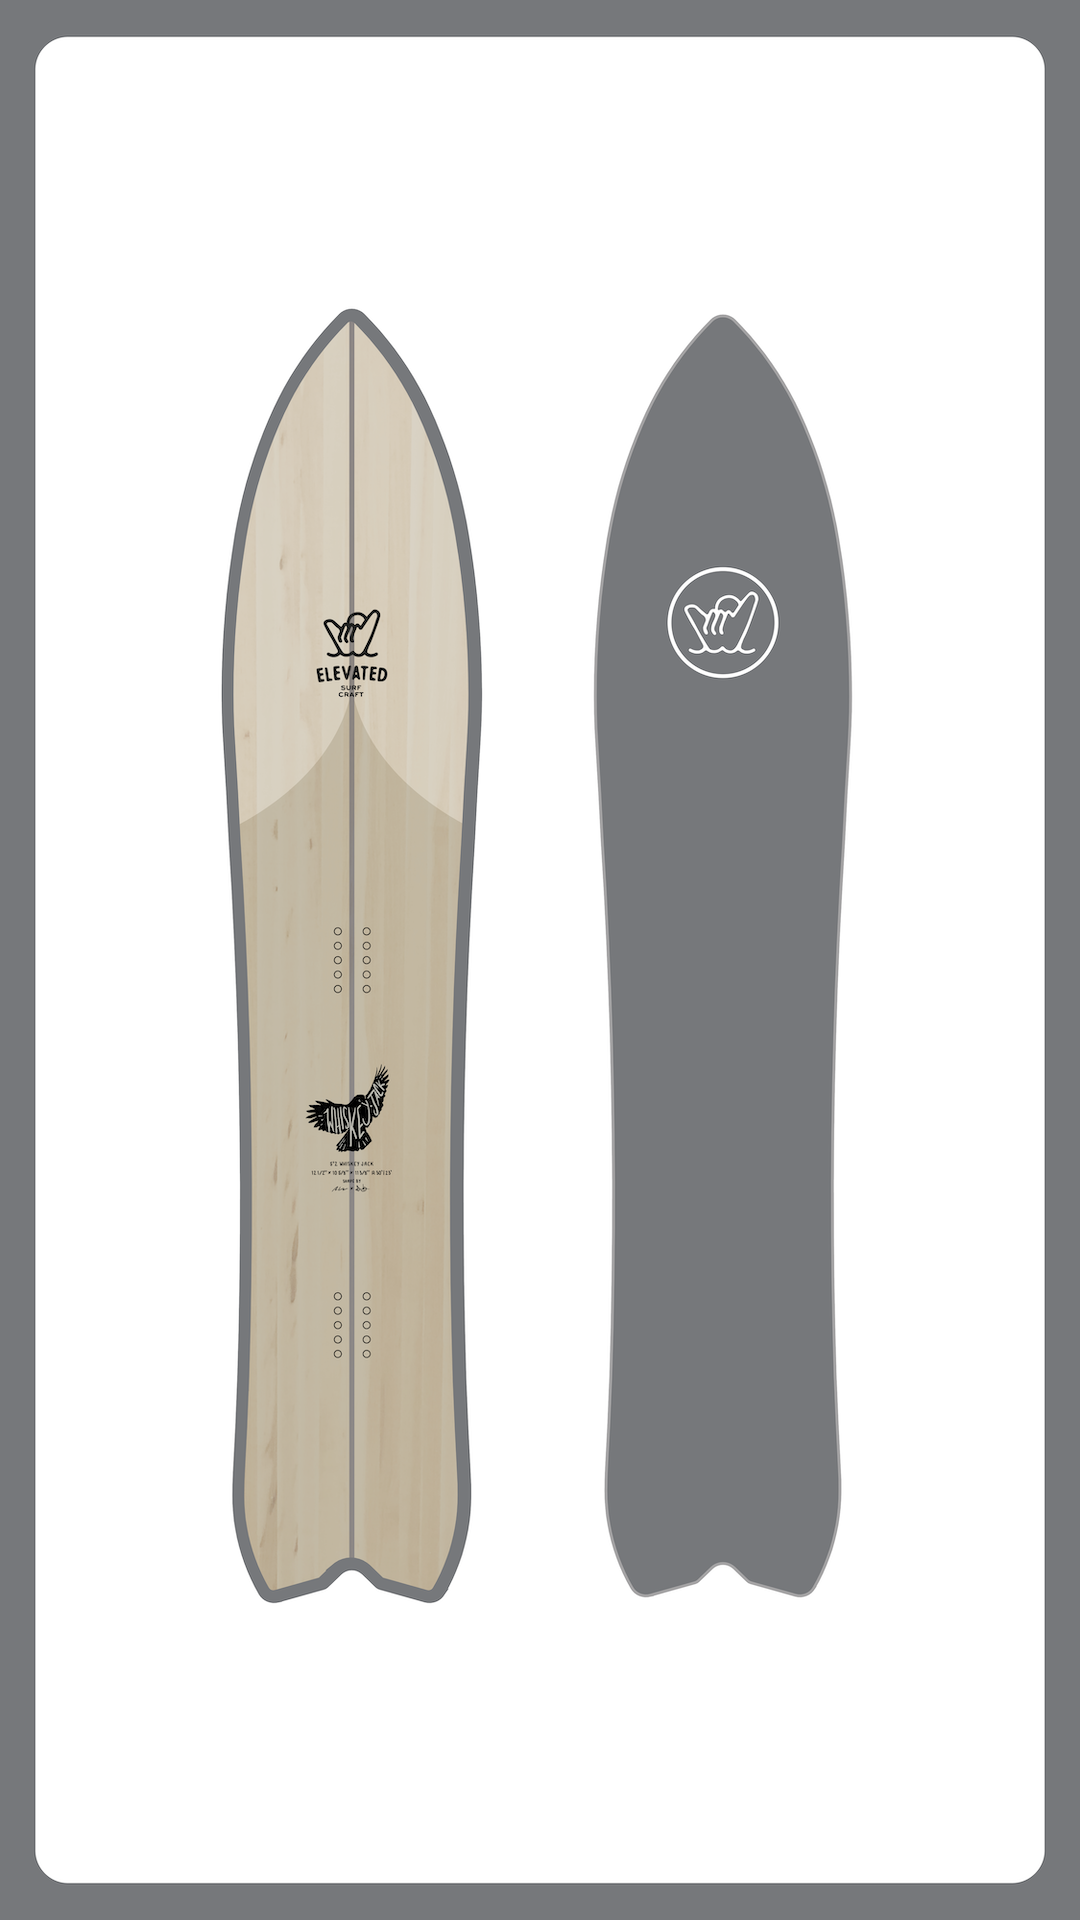 Whiskey Jack Surfboard | Elevated Surfboard | Elevated Surf Craft